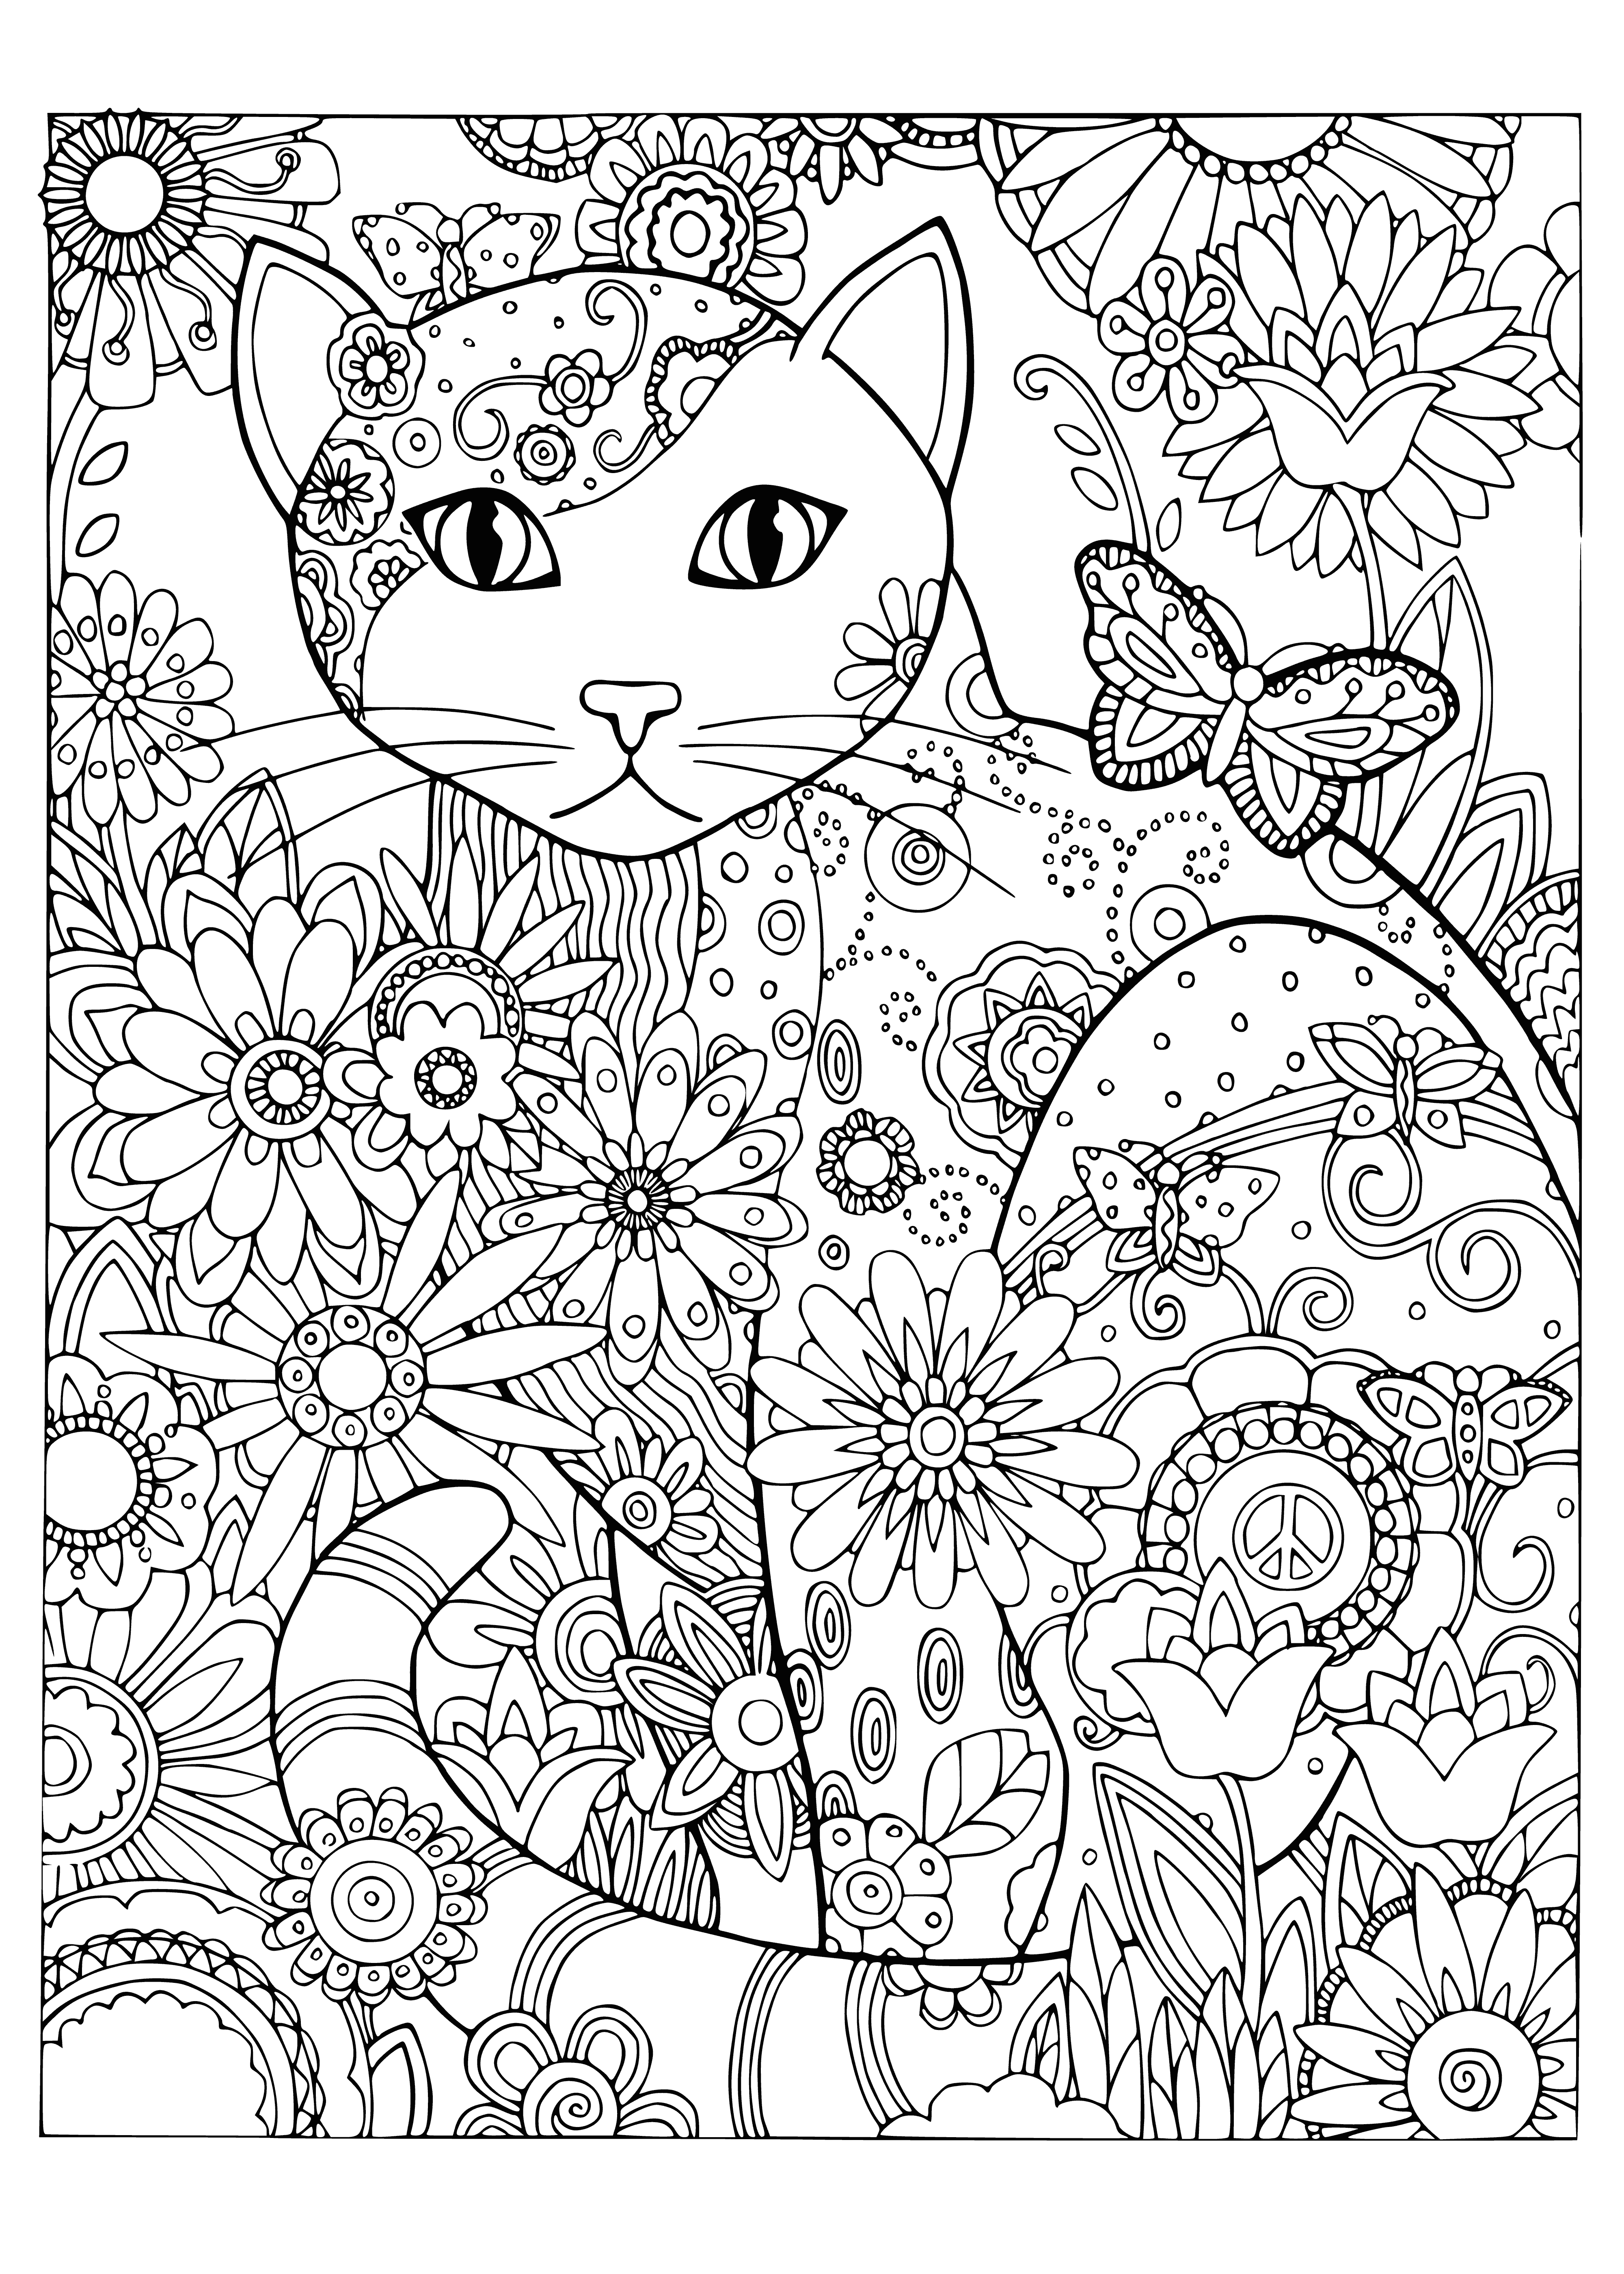 coloring page: Beautiful cat surrounded by flowers, carefully shaded with soft colors and gentle compositions, perfect scene to color.